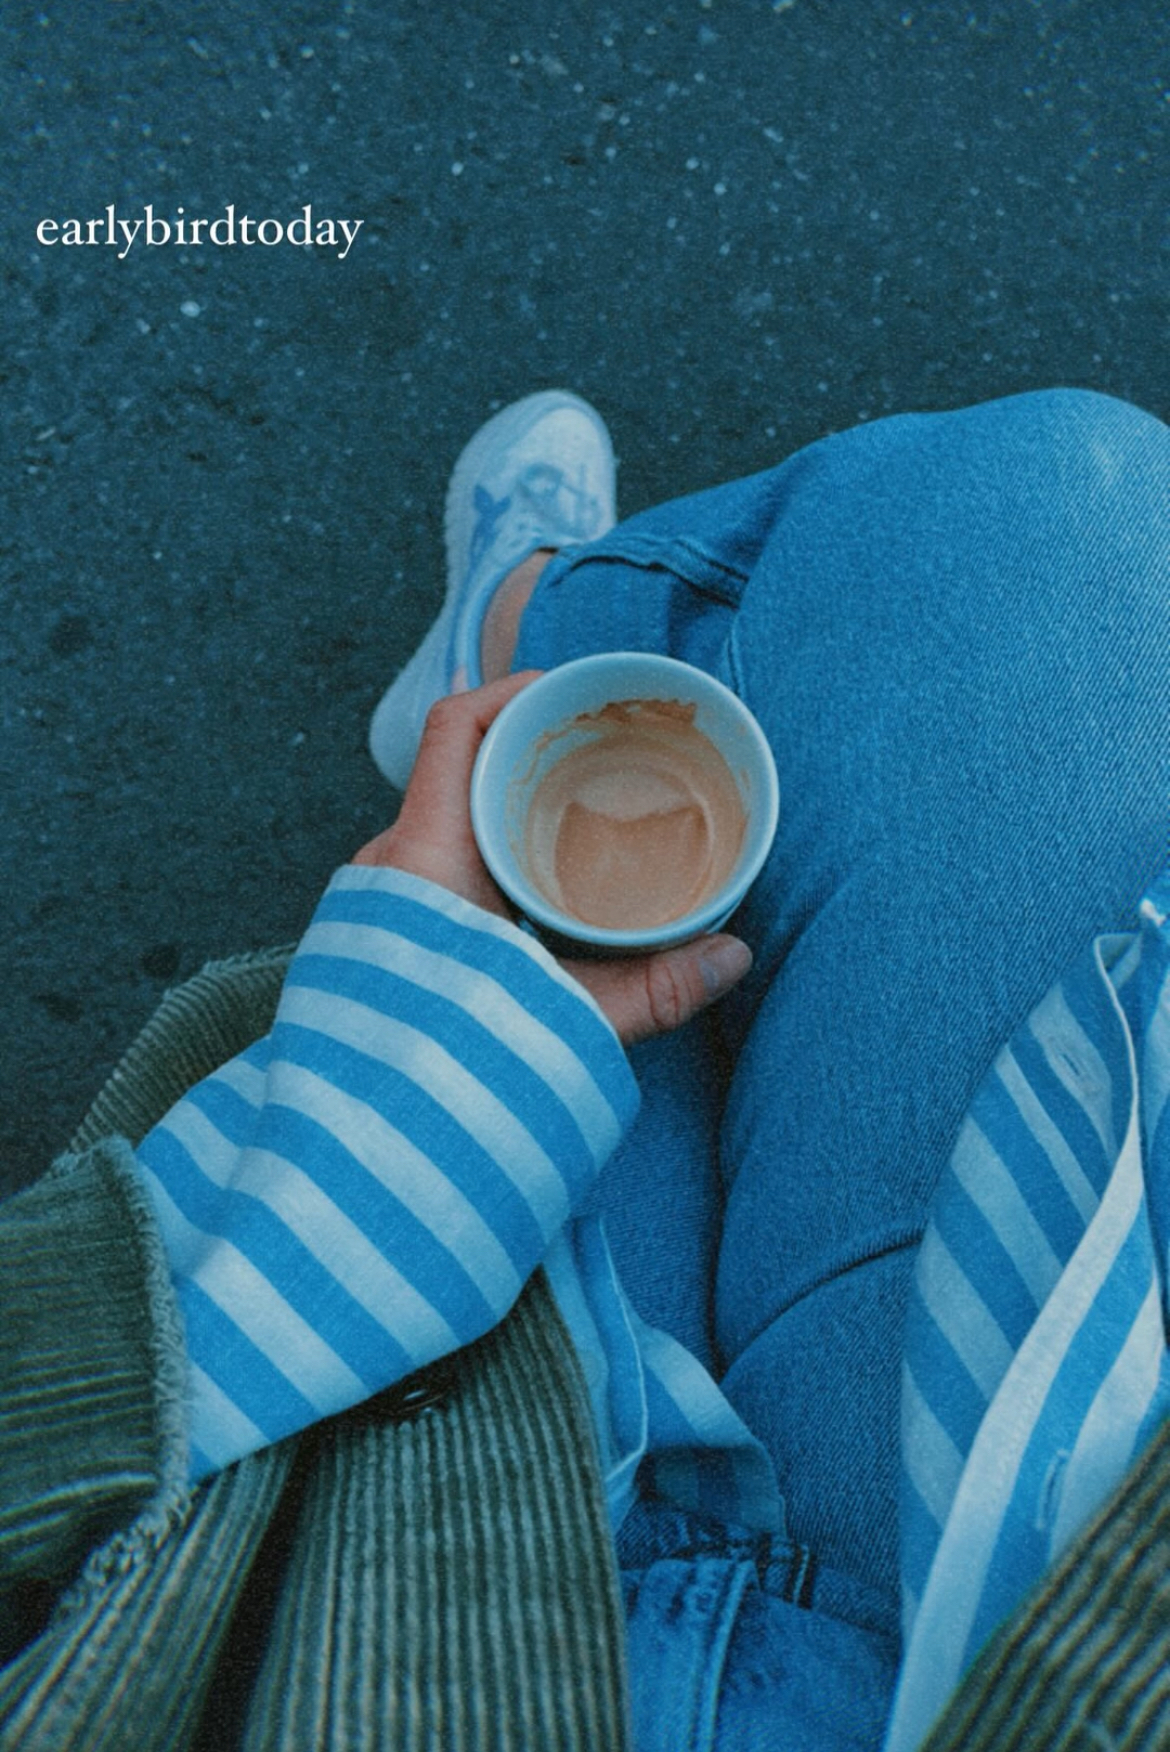 a person holding a cup of coffee